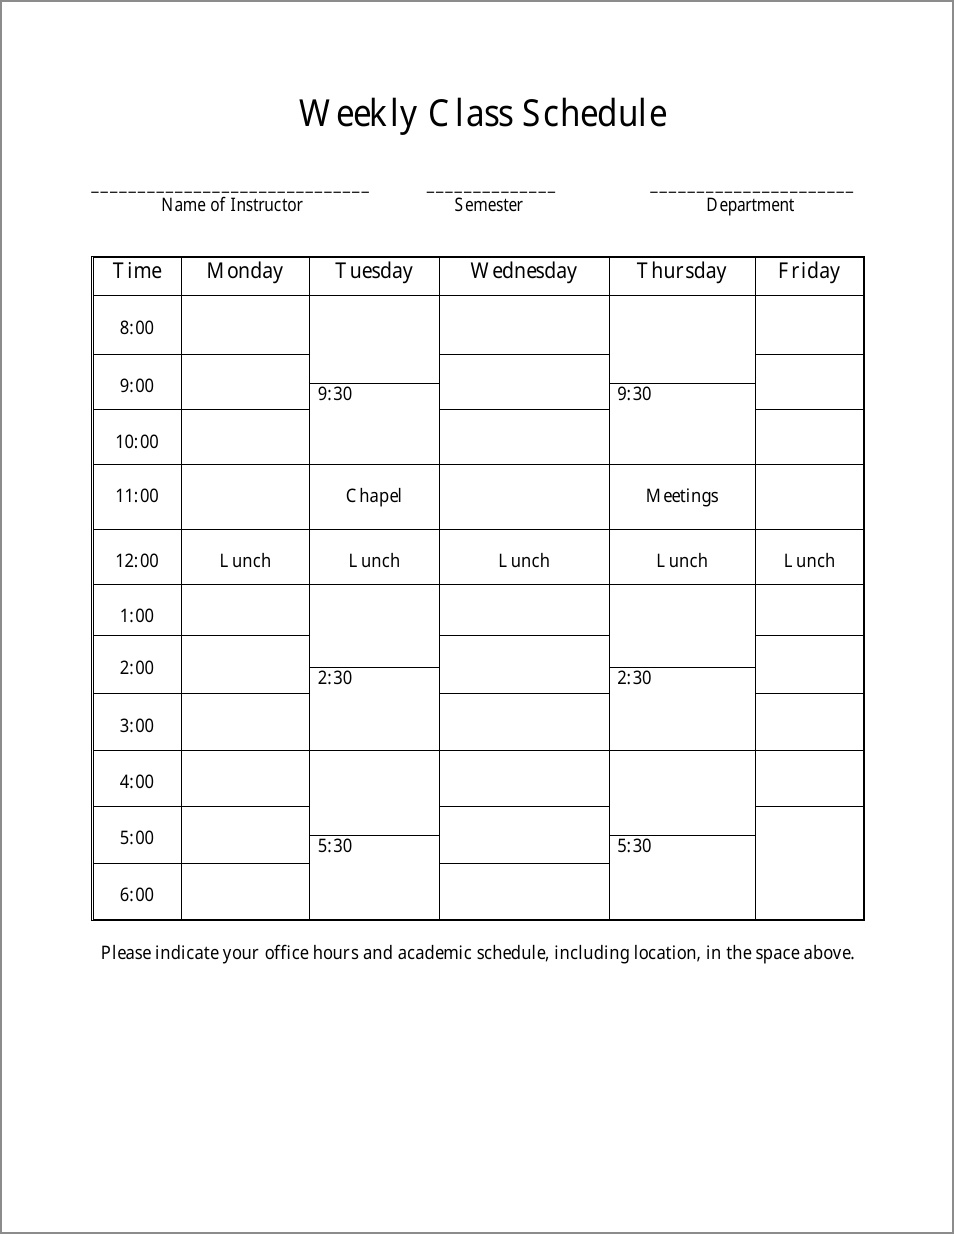 class weekly schedule template example